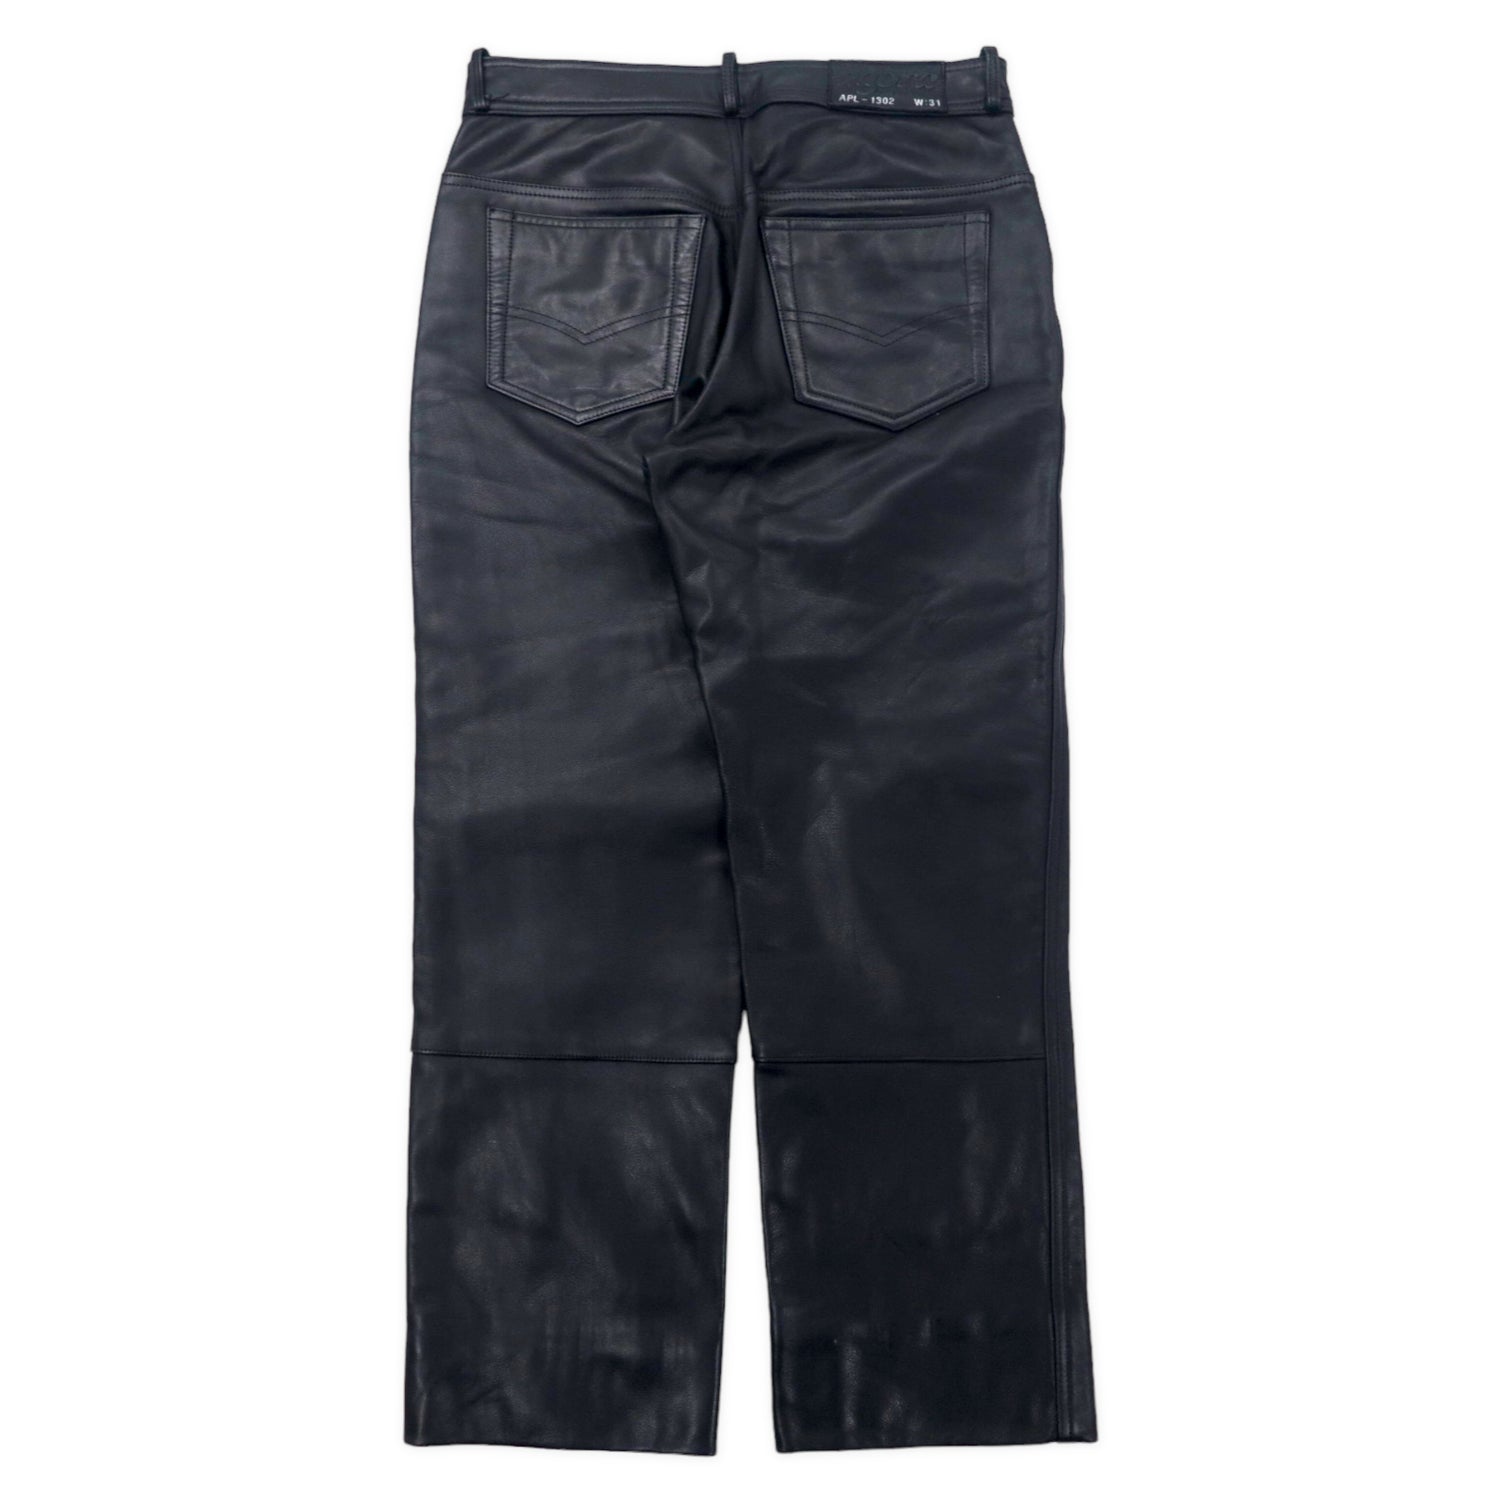 AGORA leather PANTS 31 Black Cowhide Zipper Fly 5 Pocket – 日本然